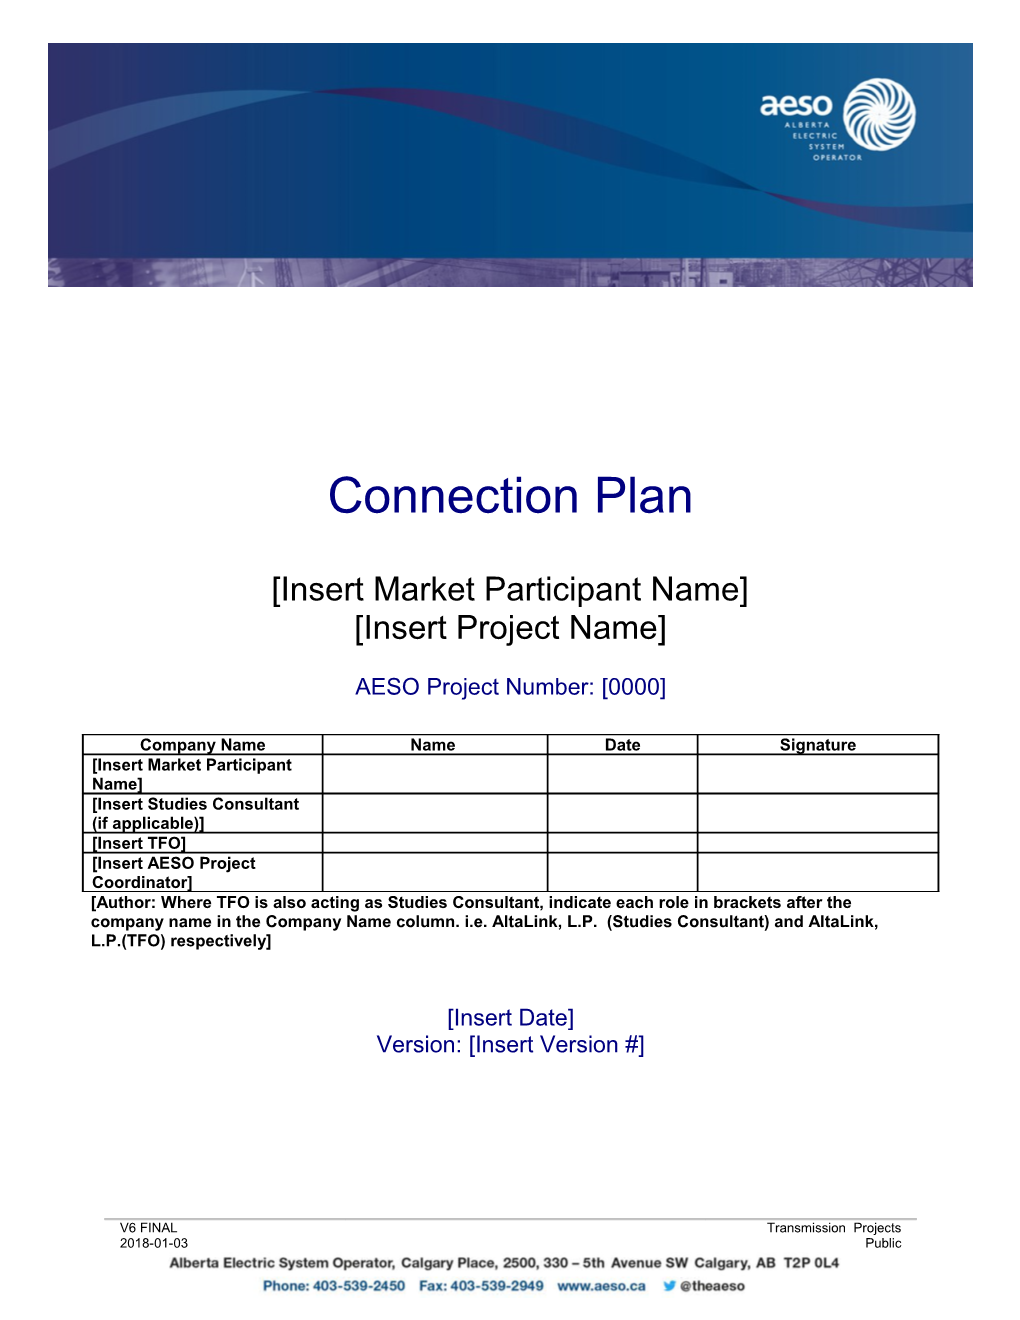 Connection Plan Template